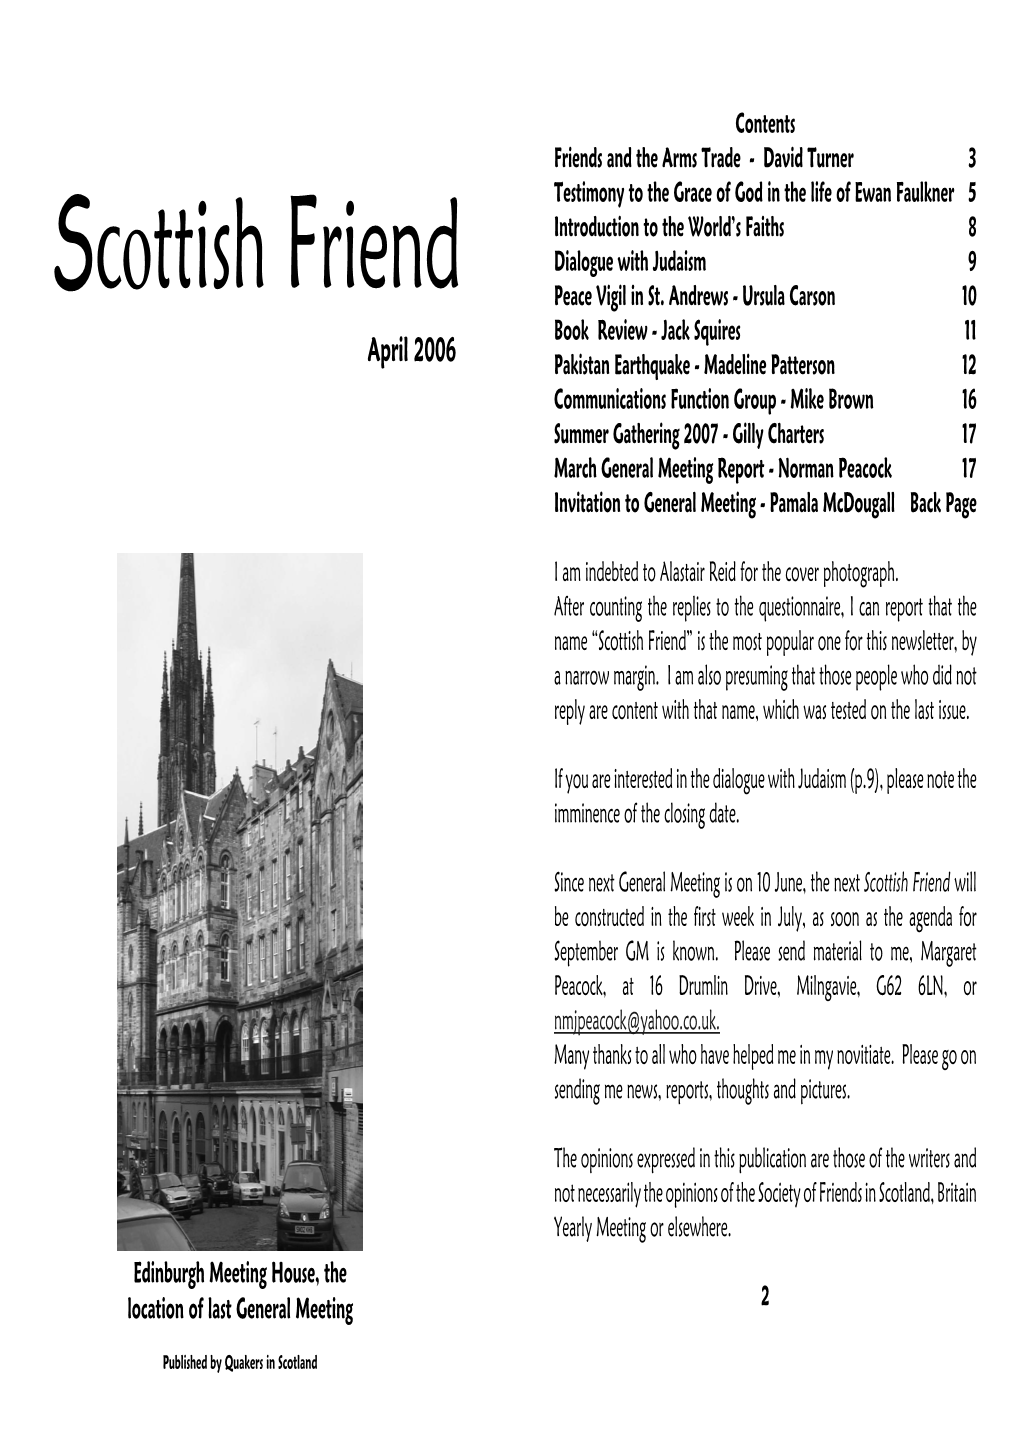 Scottish Friend” Is the Most Popular One for This Newsletter, by a Narrow Margin